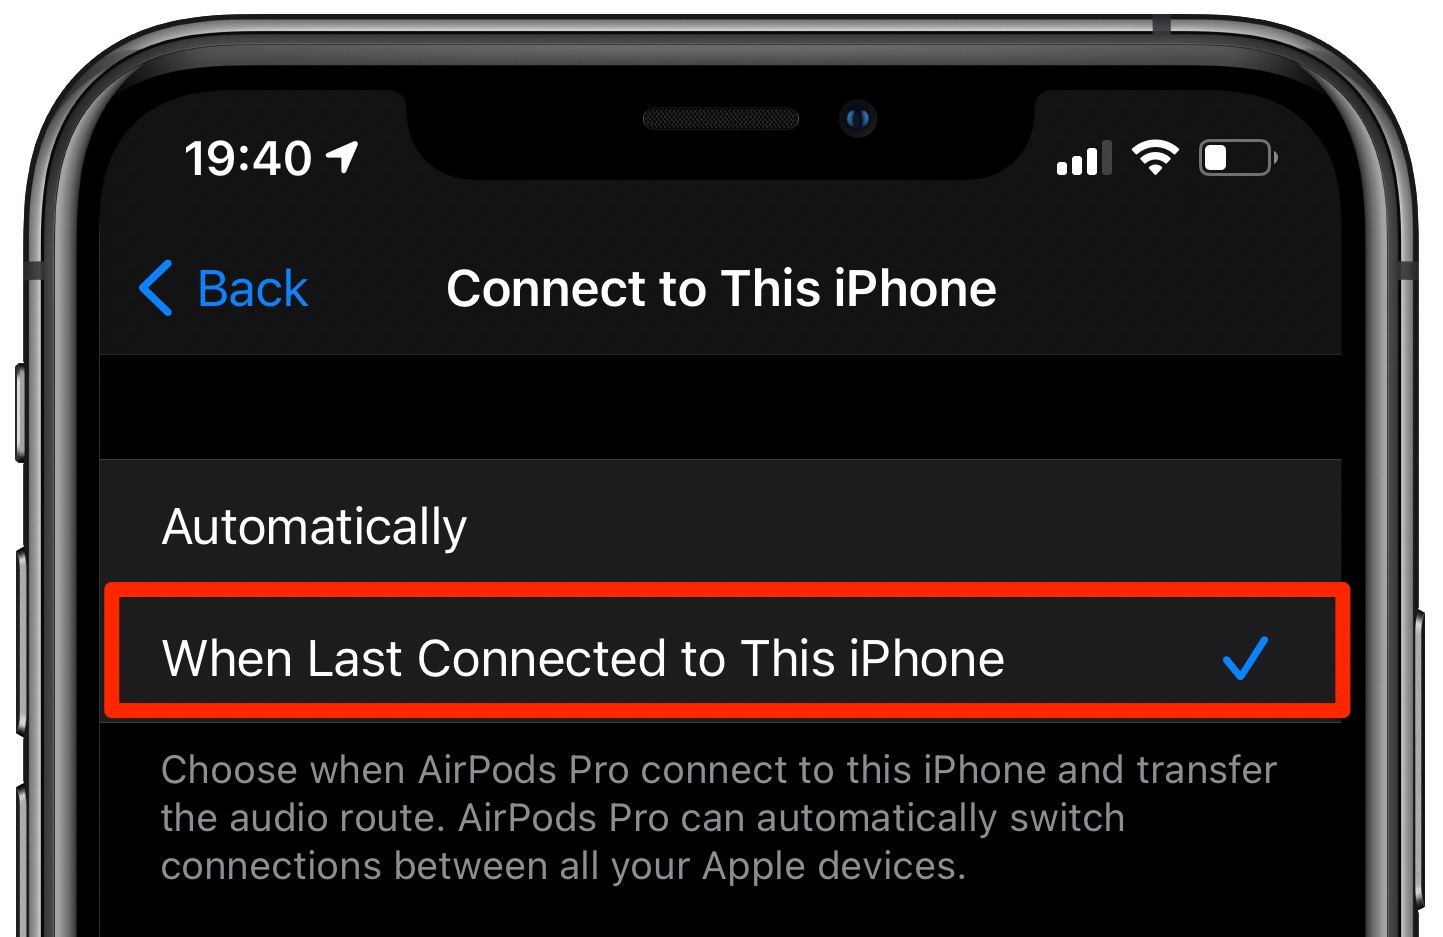 AirPods automatic device switching - the setting labeled with the text "When Last Connected to This iPhone" is highlighted on a screenshot